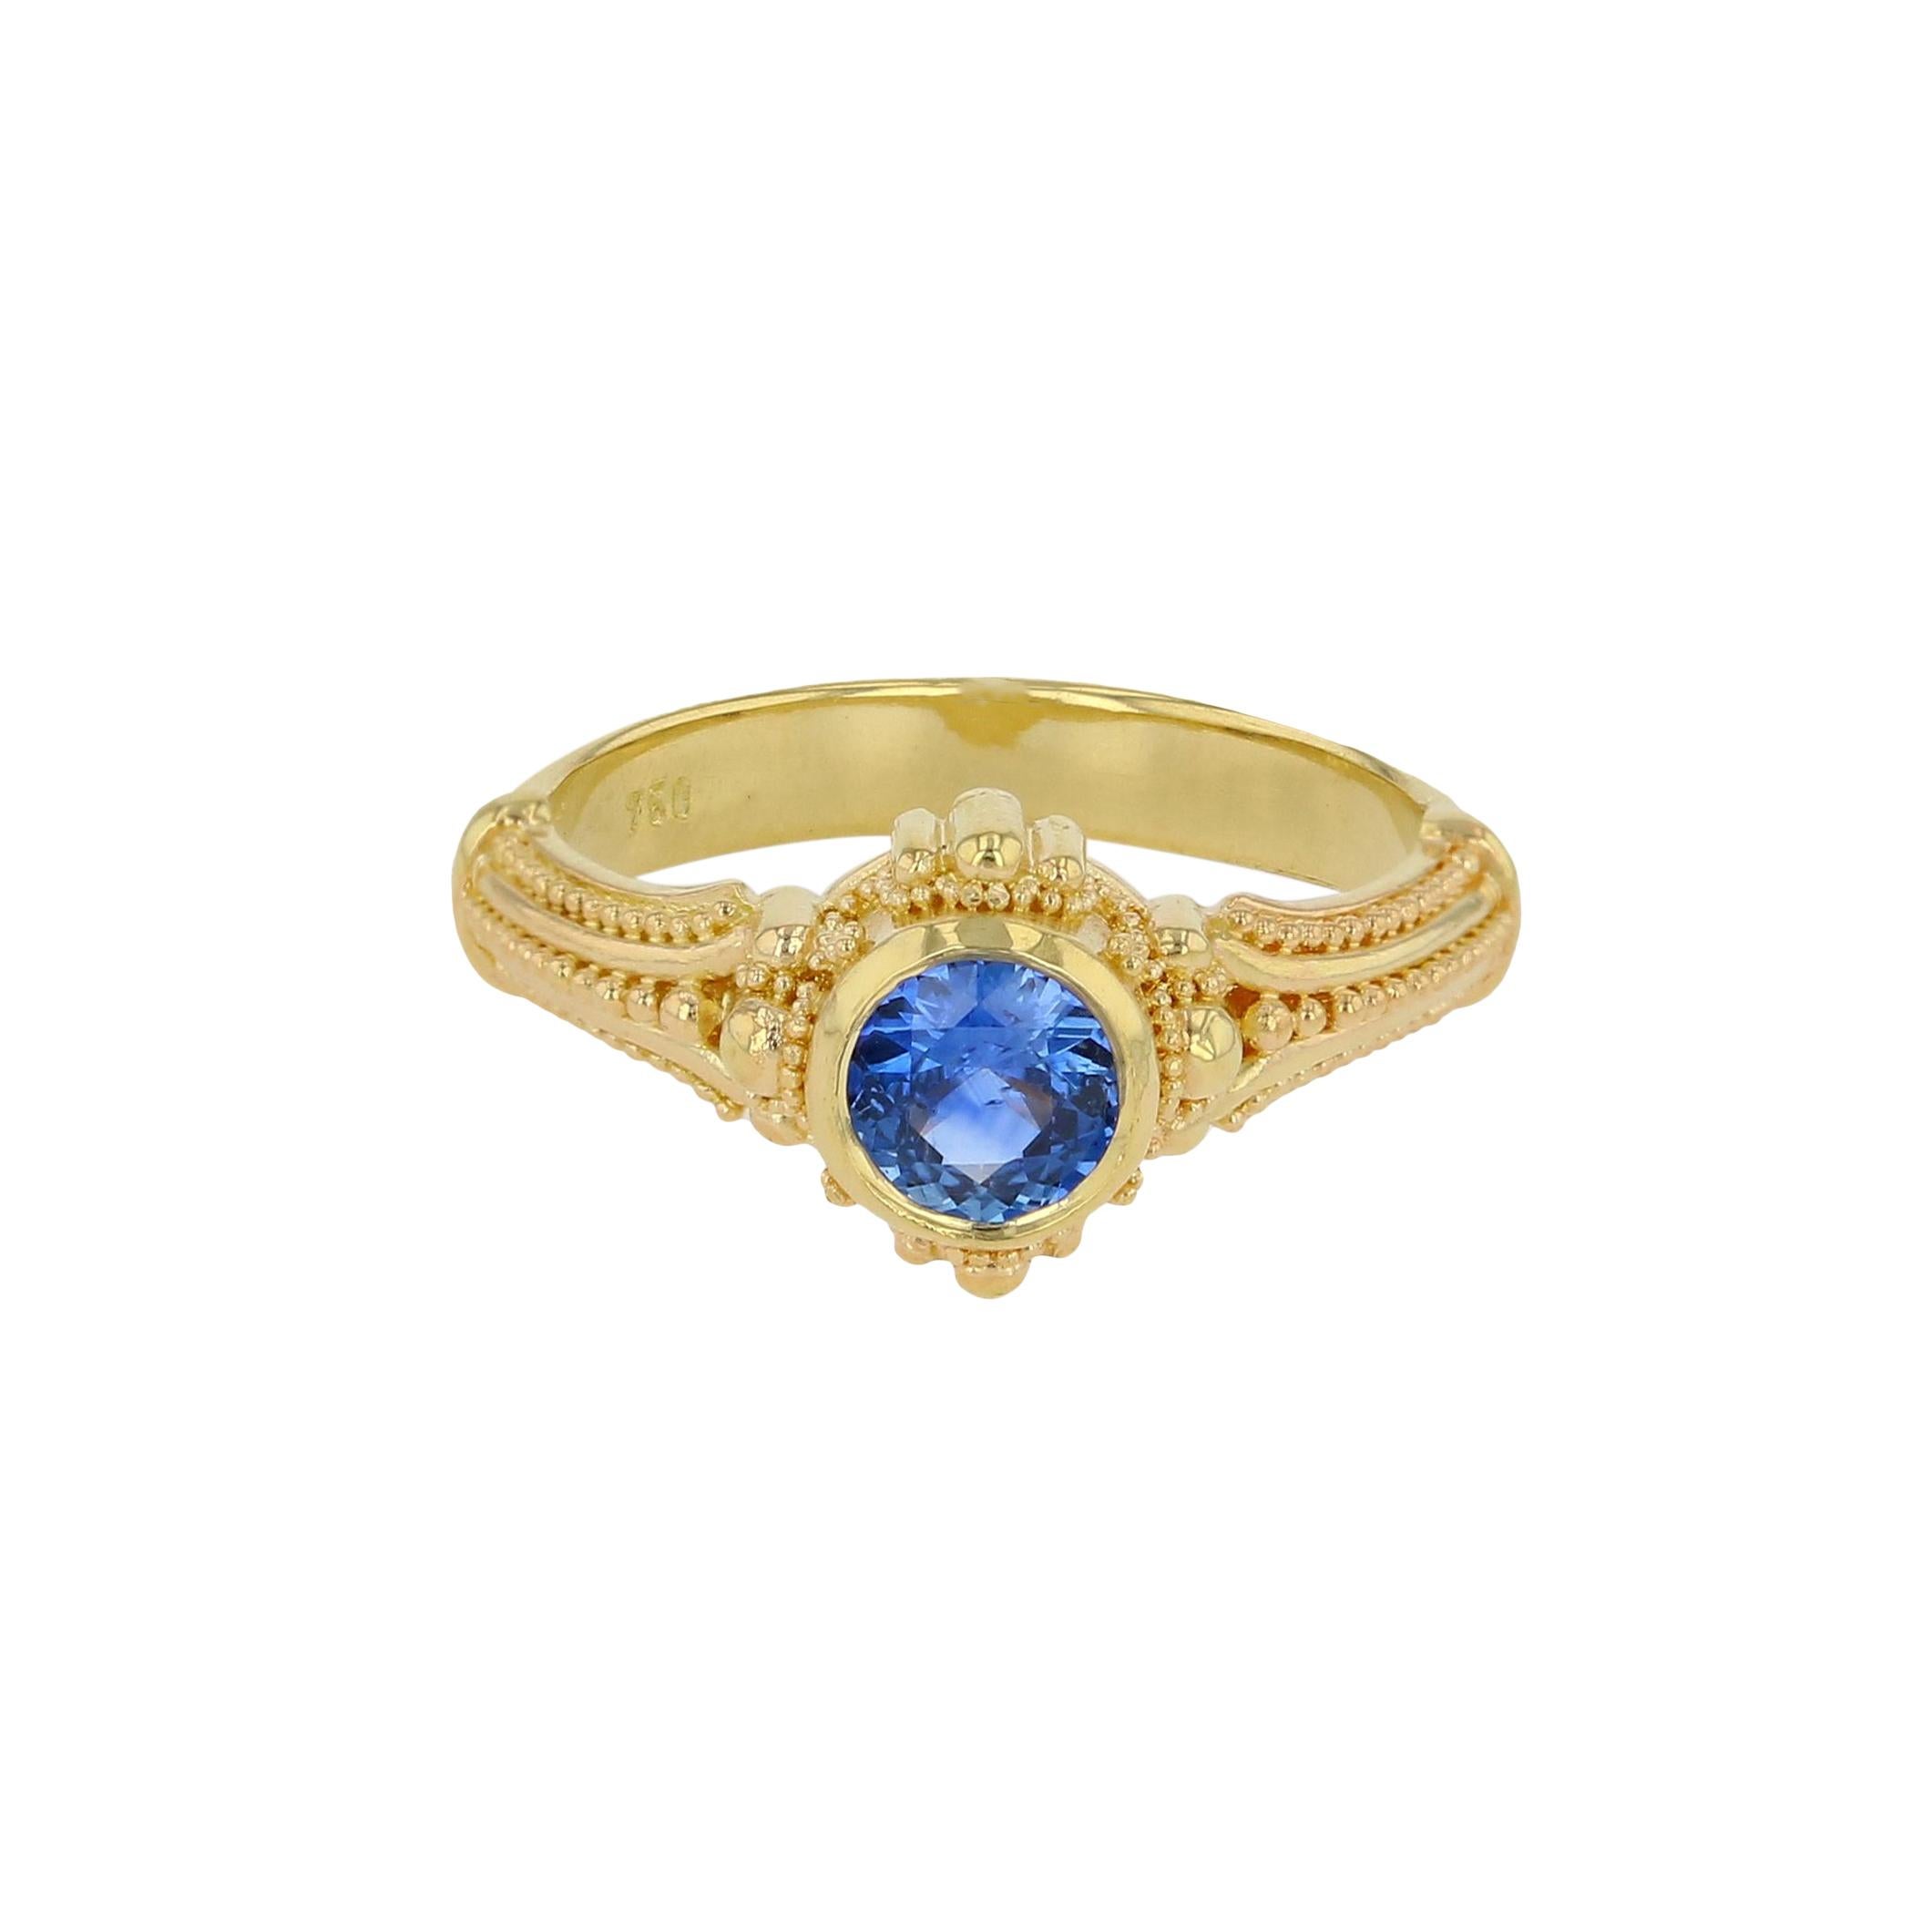 What a beautiful Cornflower Blue Sapphire! It just glows. Raible's use of 18 karat gold with it's lovely detailing, frames this stunning Blue Sapphire  beautifully and really brings this gem to life!

Blue Sapphire .91ct
6.7 grams 18 Karat Gold
Size